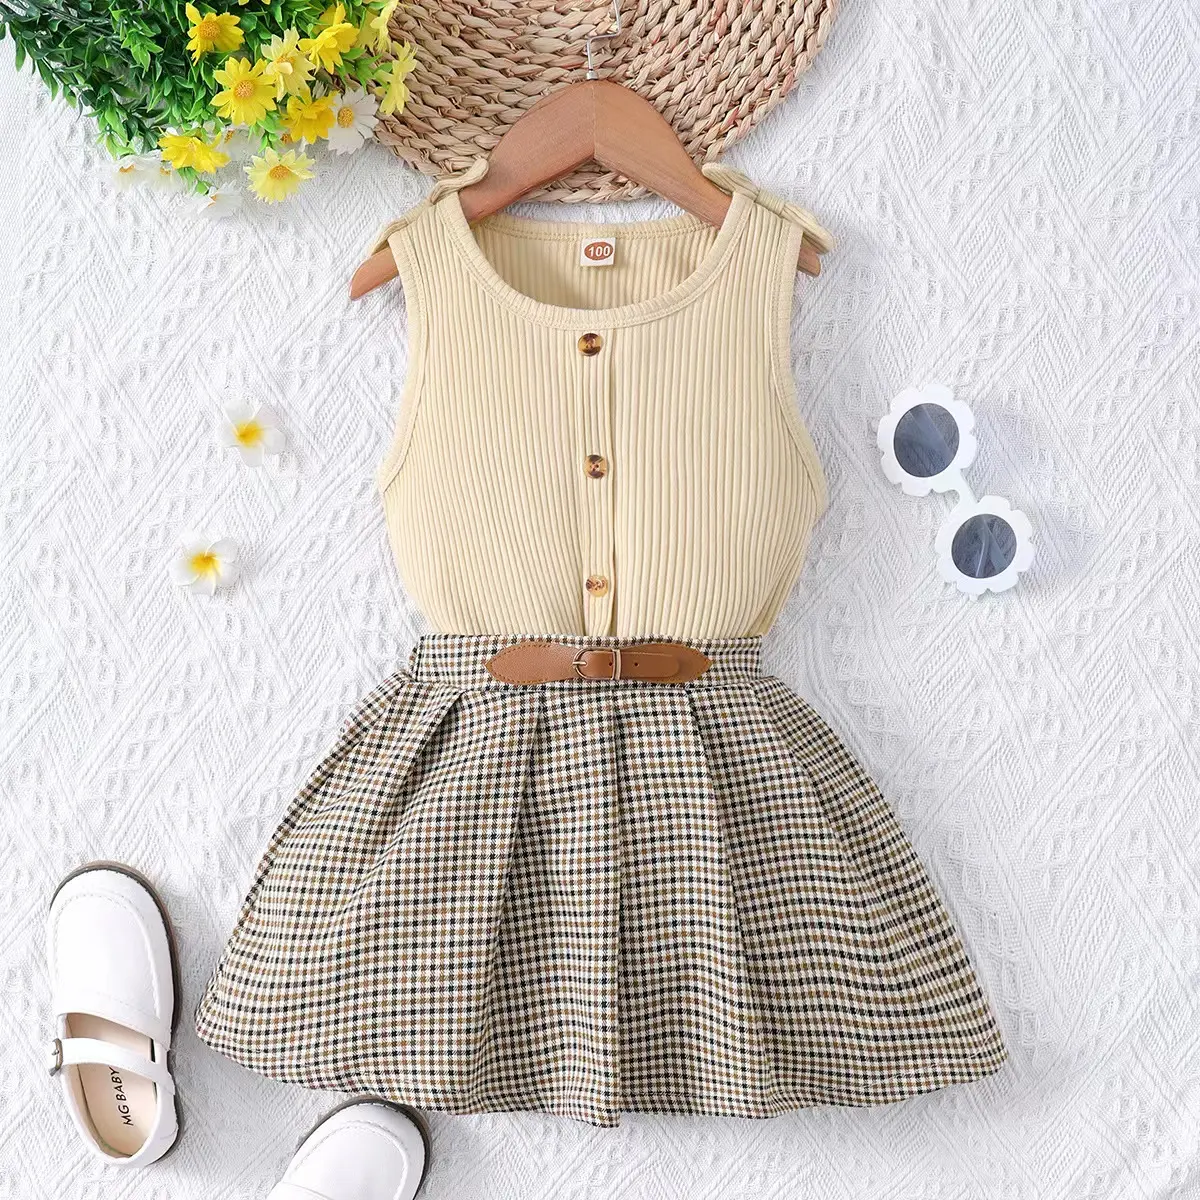 Hot Selling Girl Summer Cotton Fashion Strip Top Plaid Dress For Daily Wear